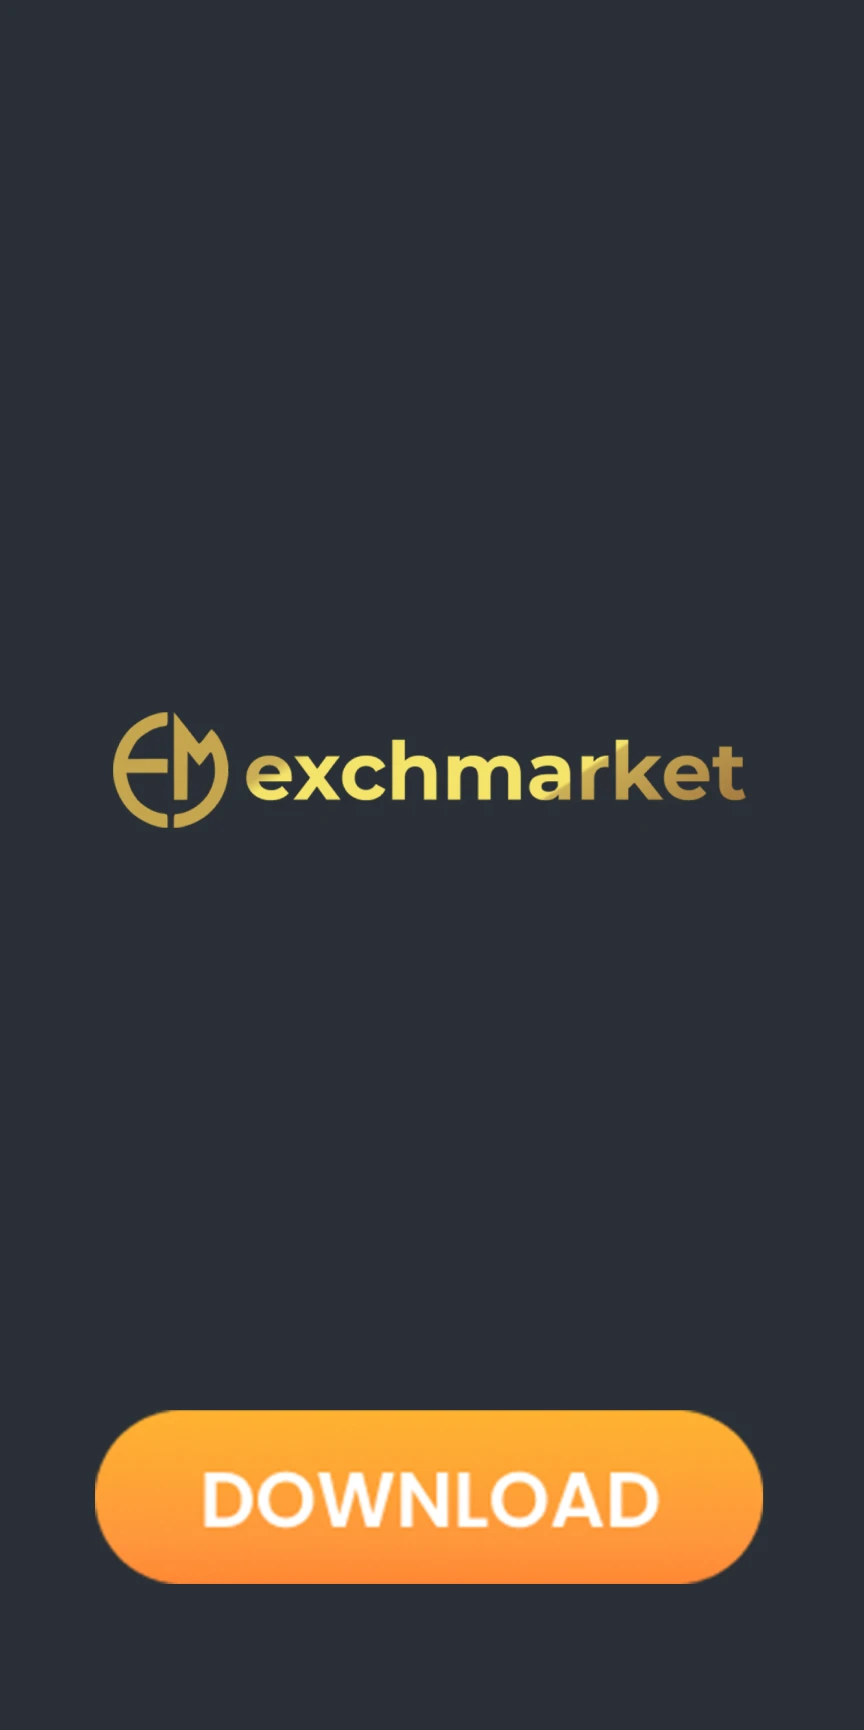 Download the Exchmarket app for iOS.